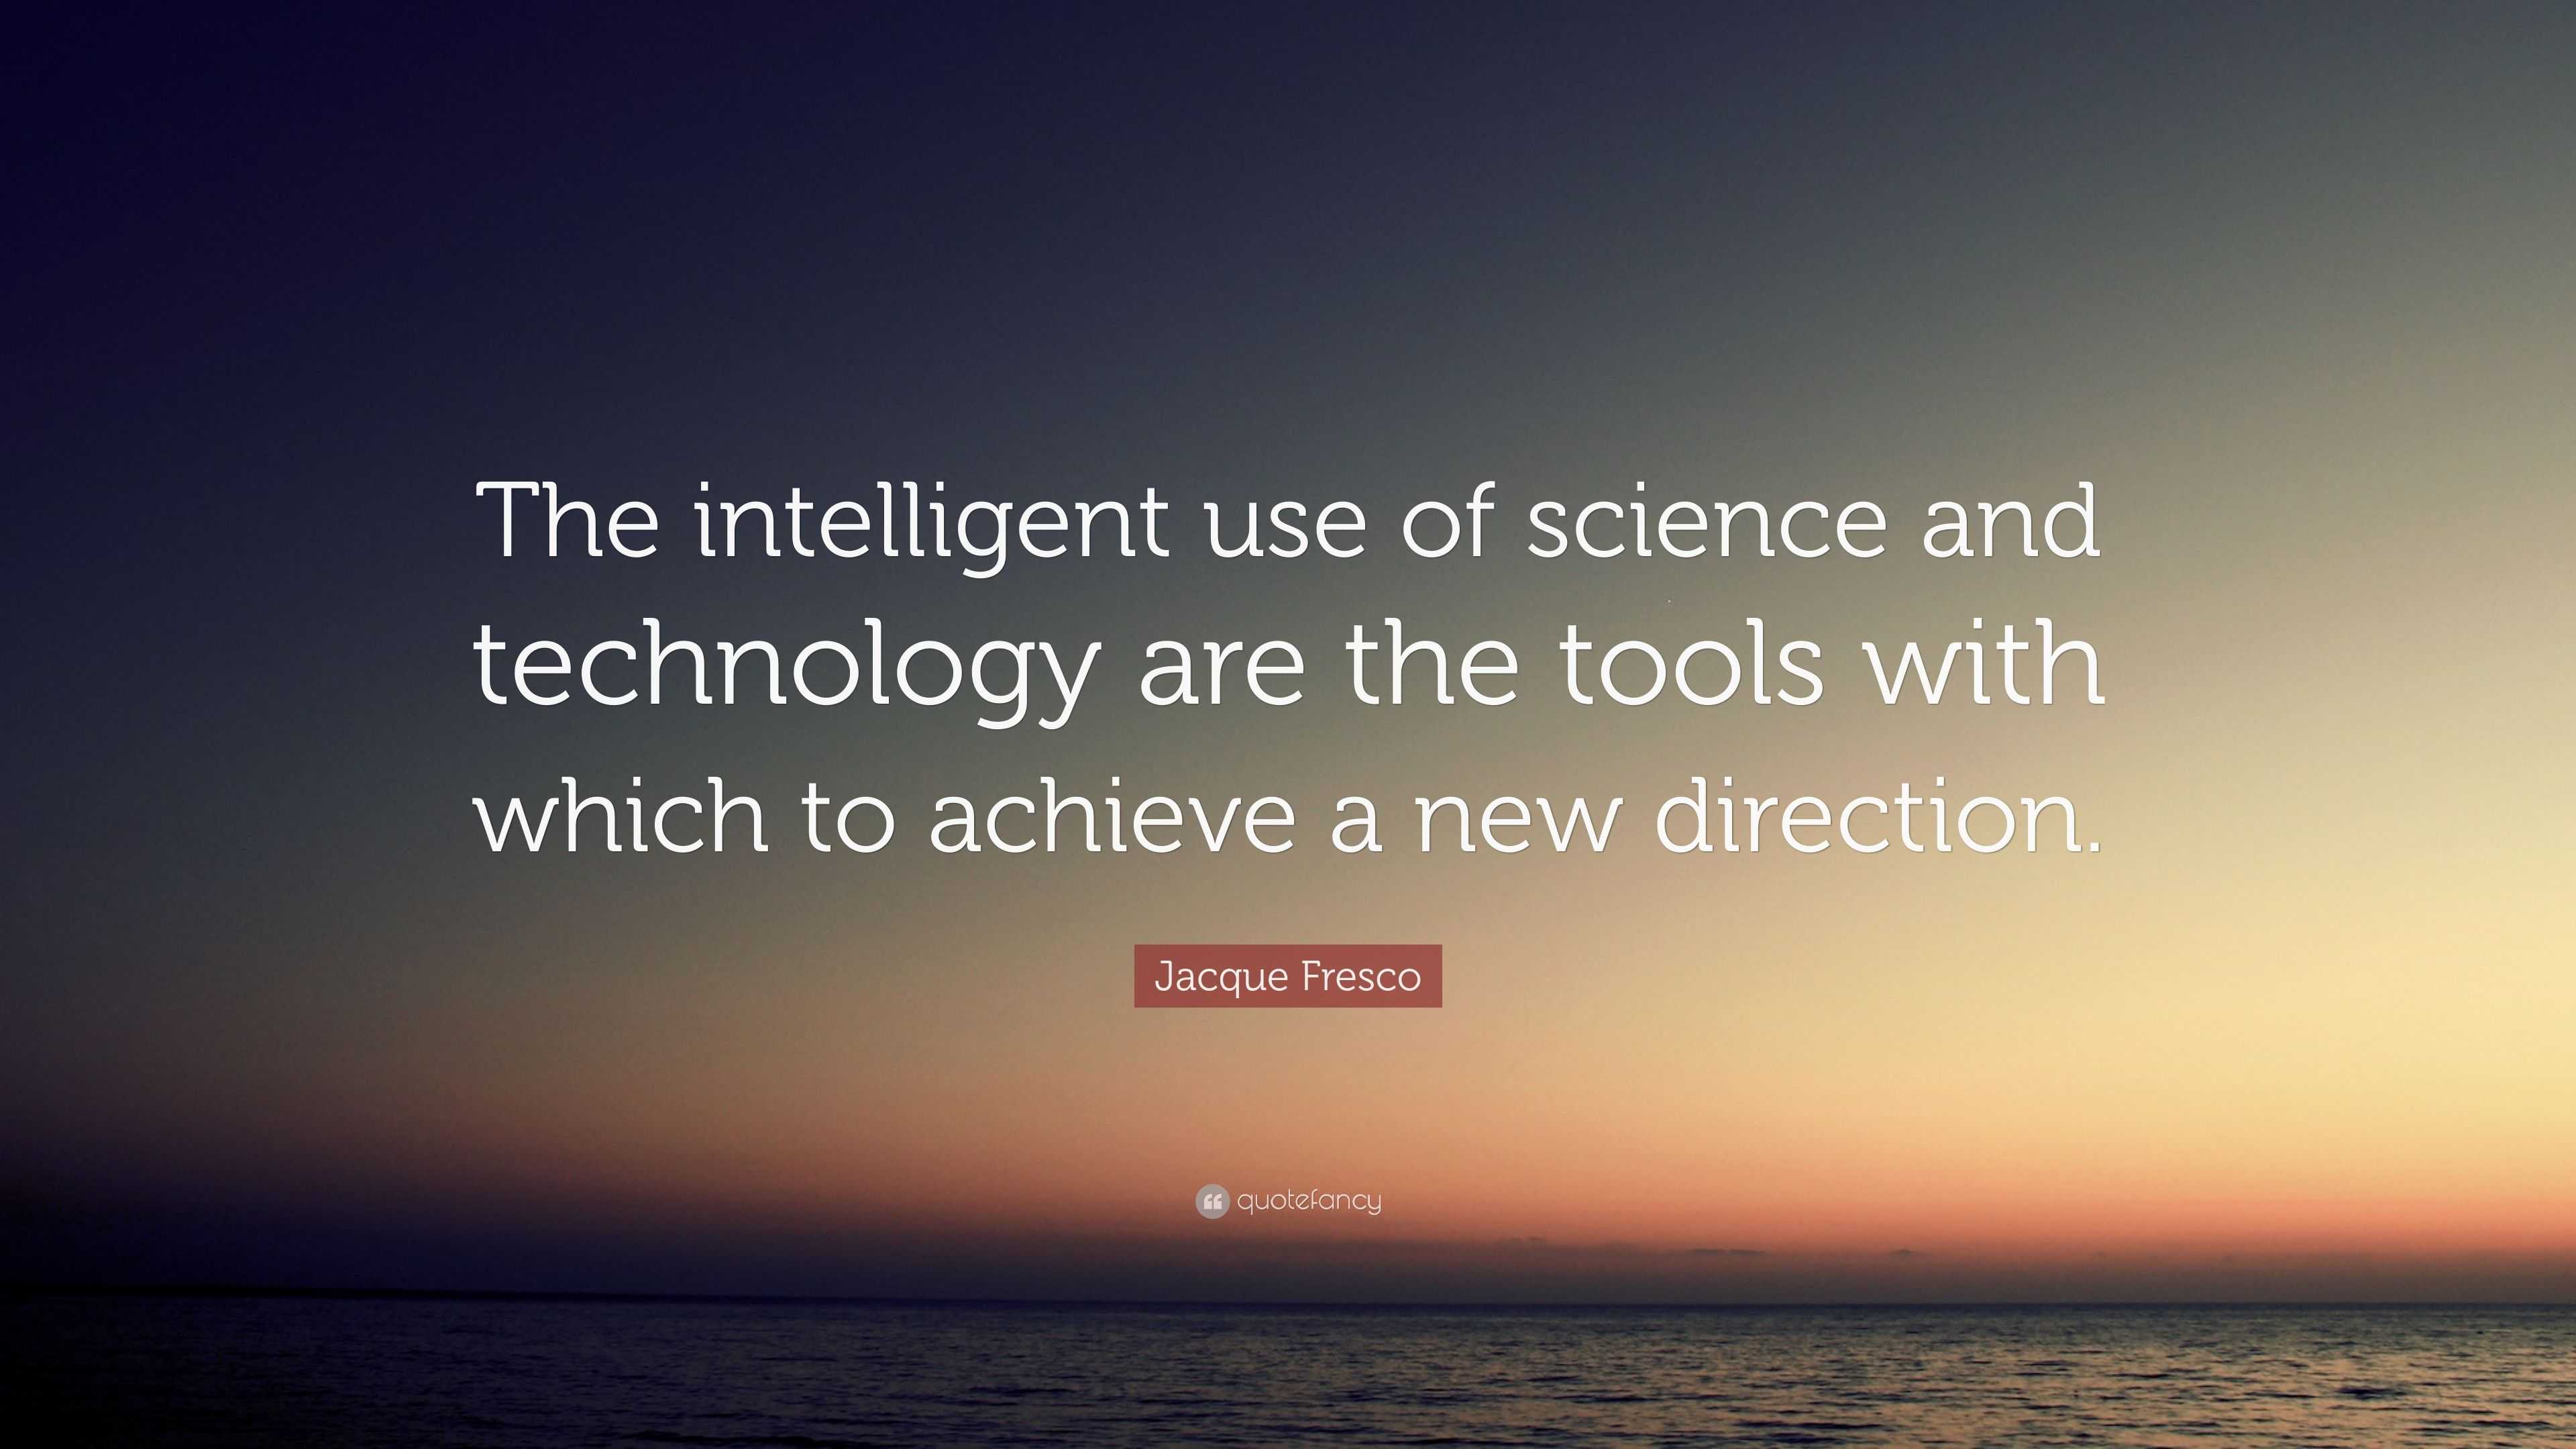 quotes on science and technology for essay